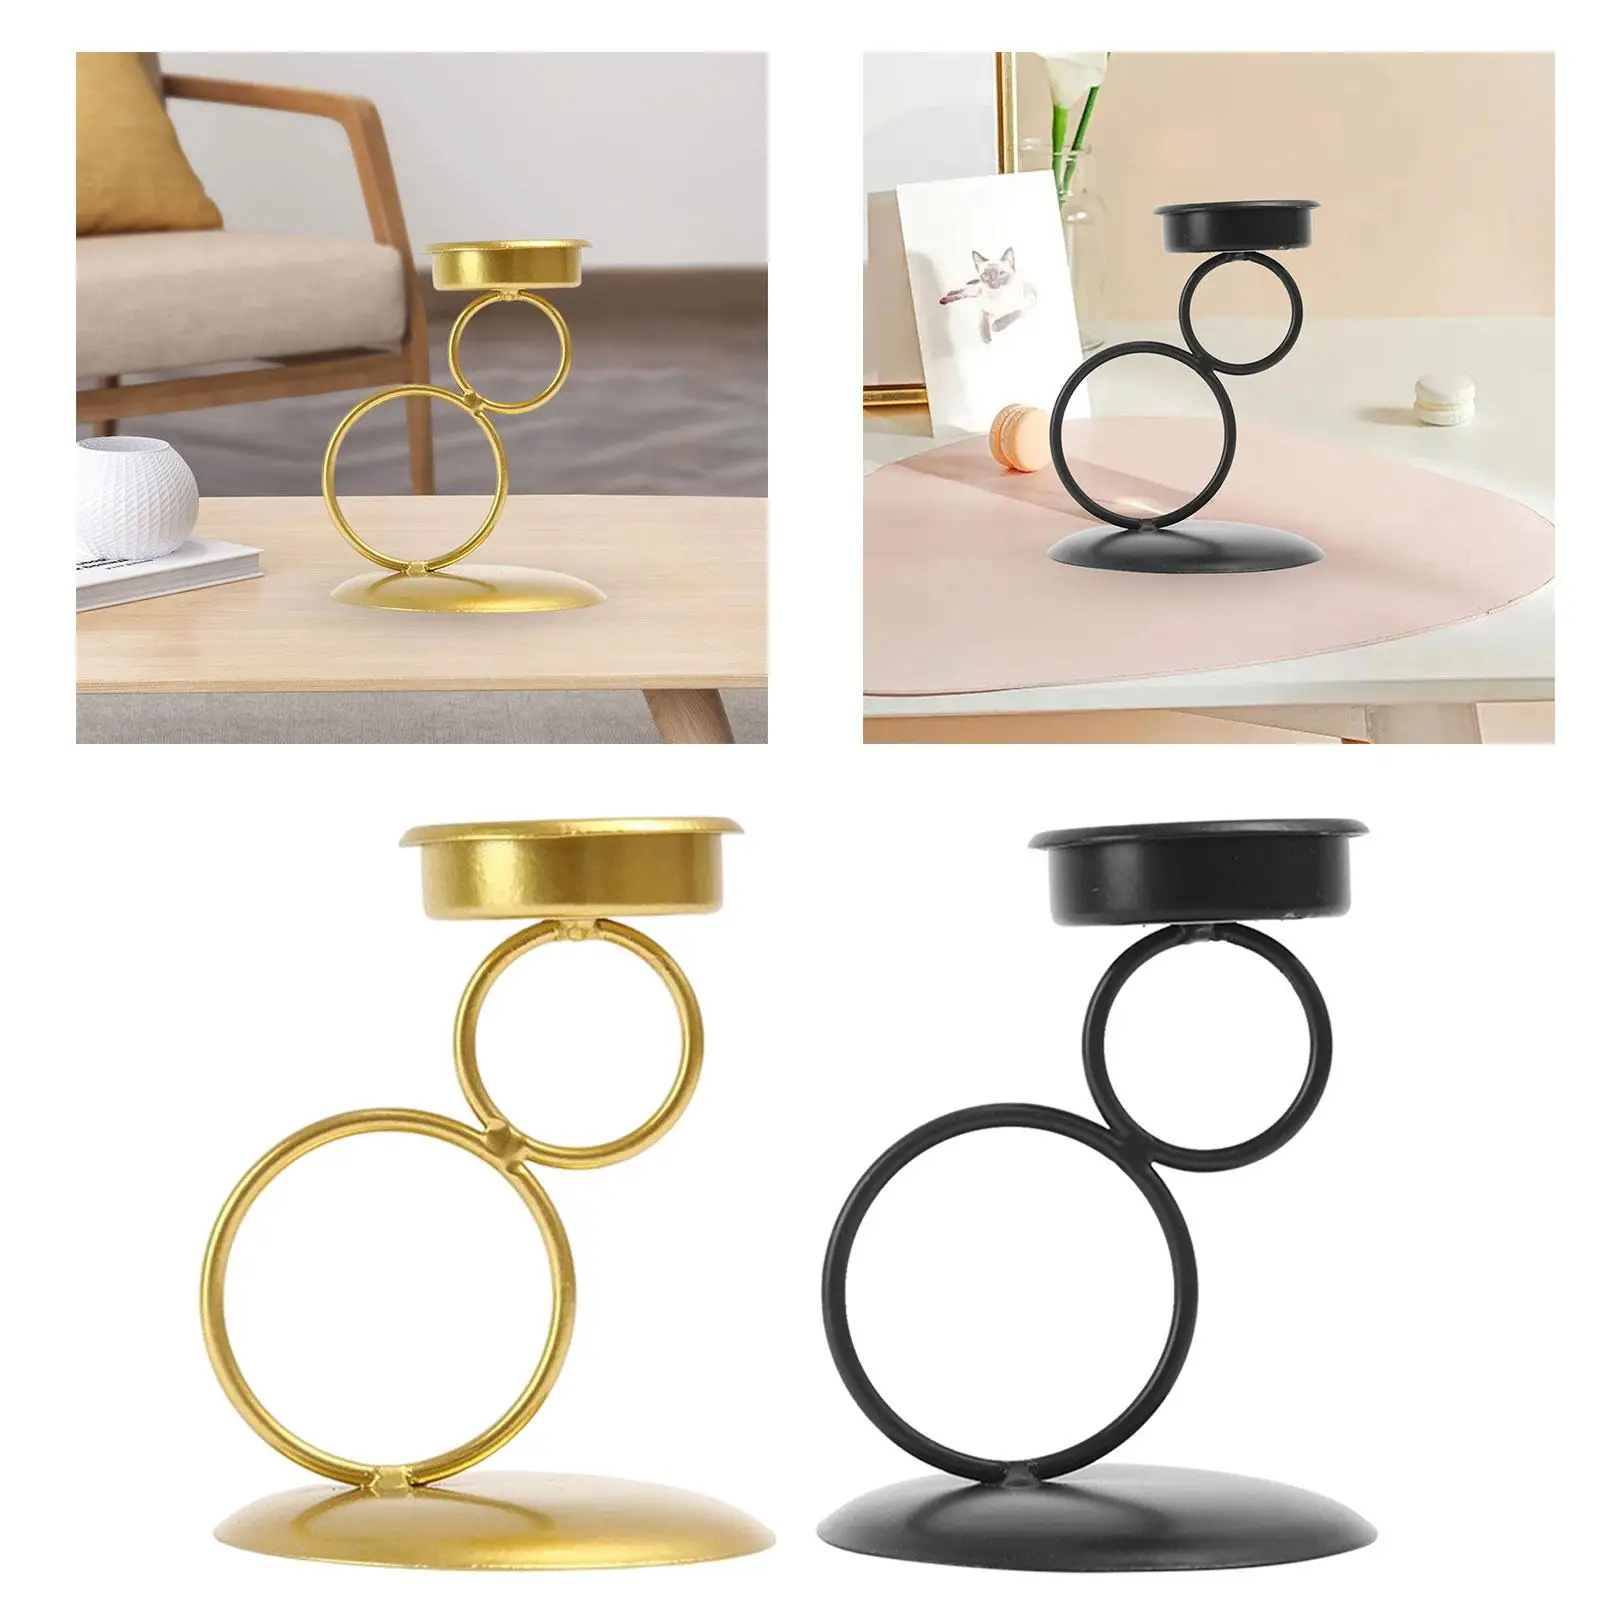 Nordic Style Iron Candle Holder Tealight Holder Candlestick Table Centrepiece for Party Dining Table Fireplace Home Decoration